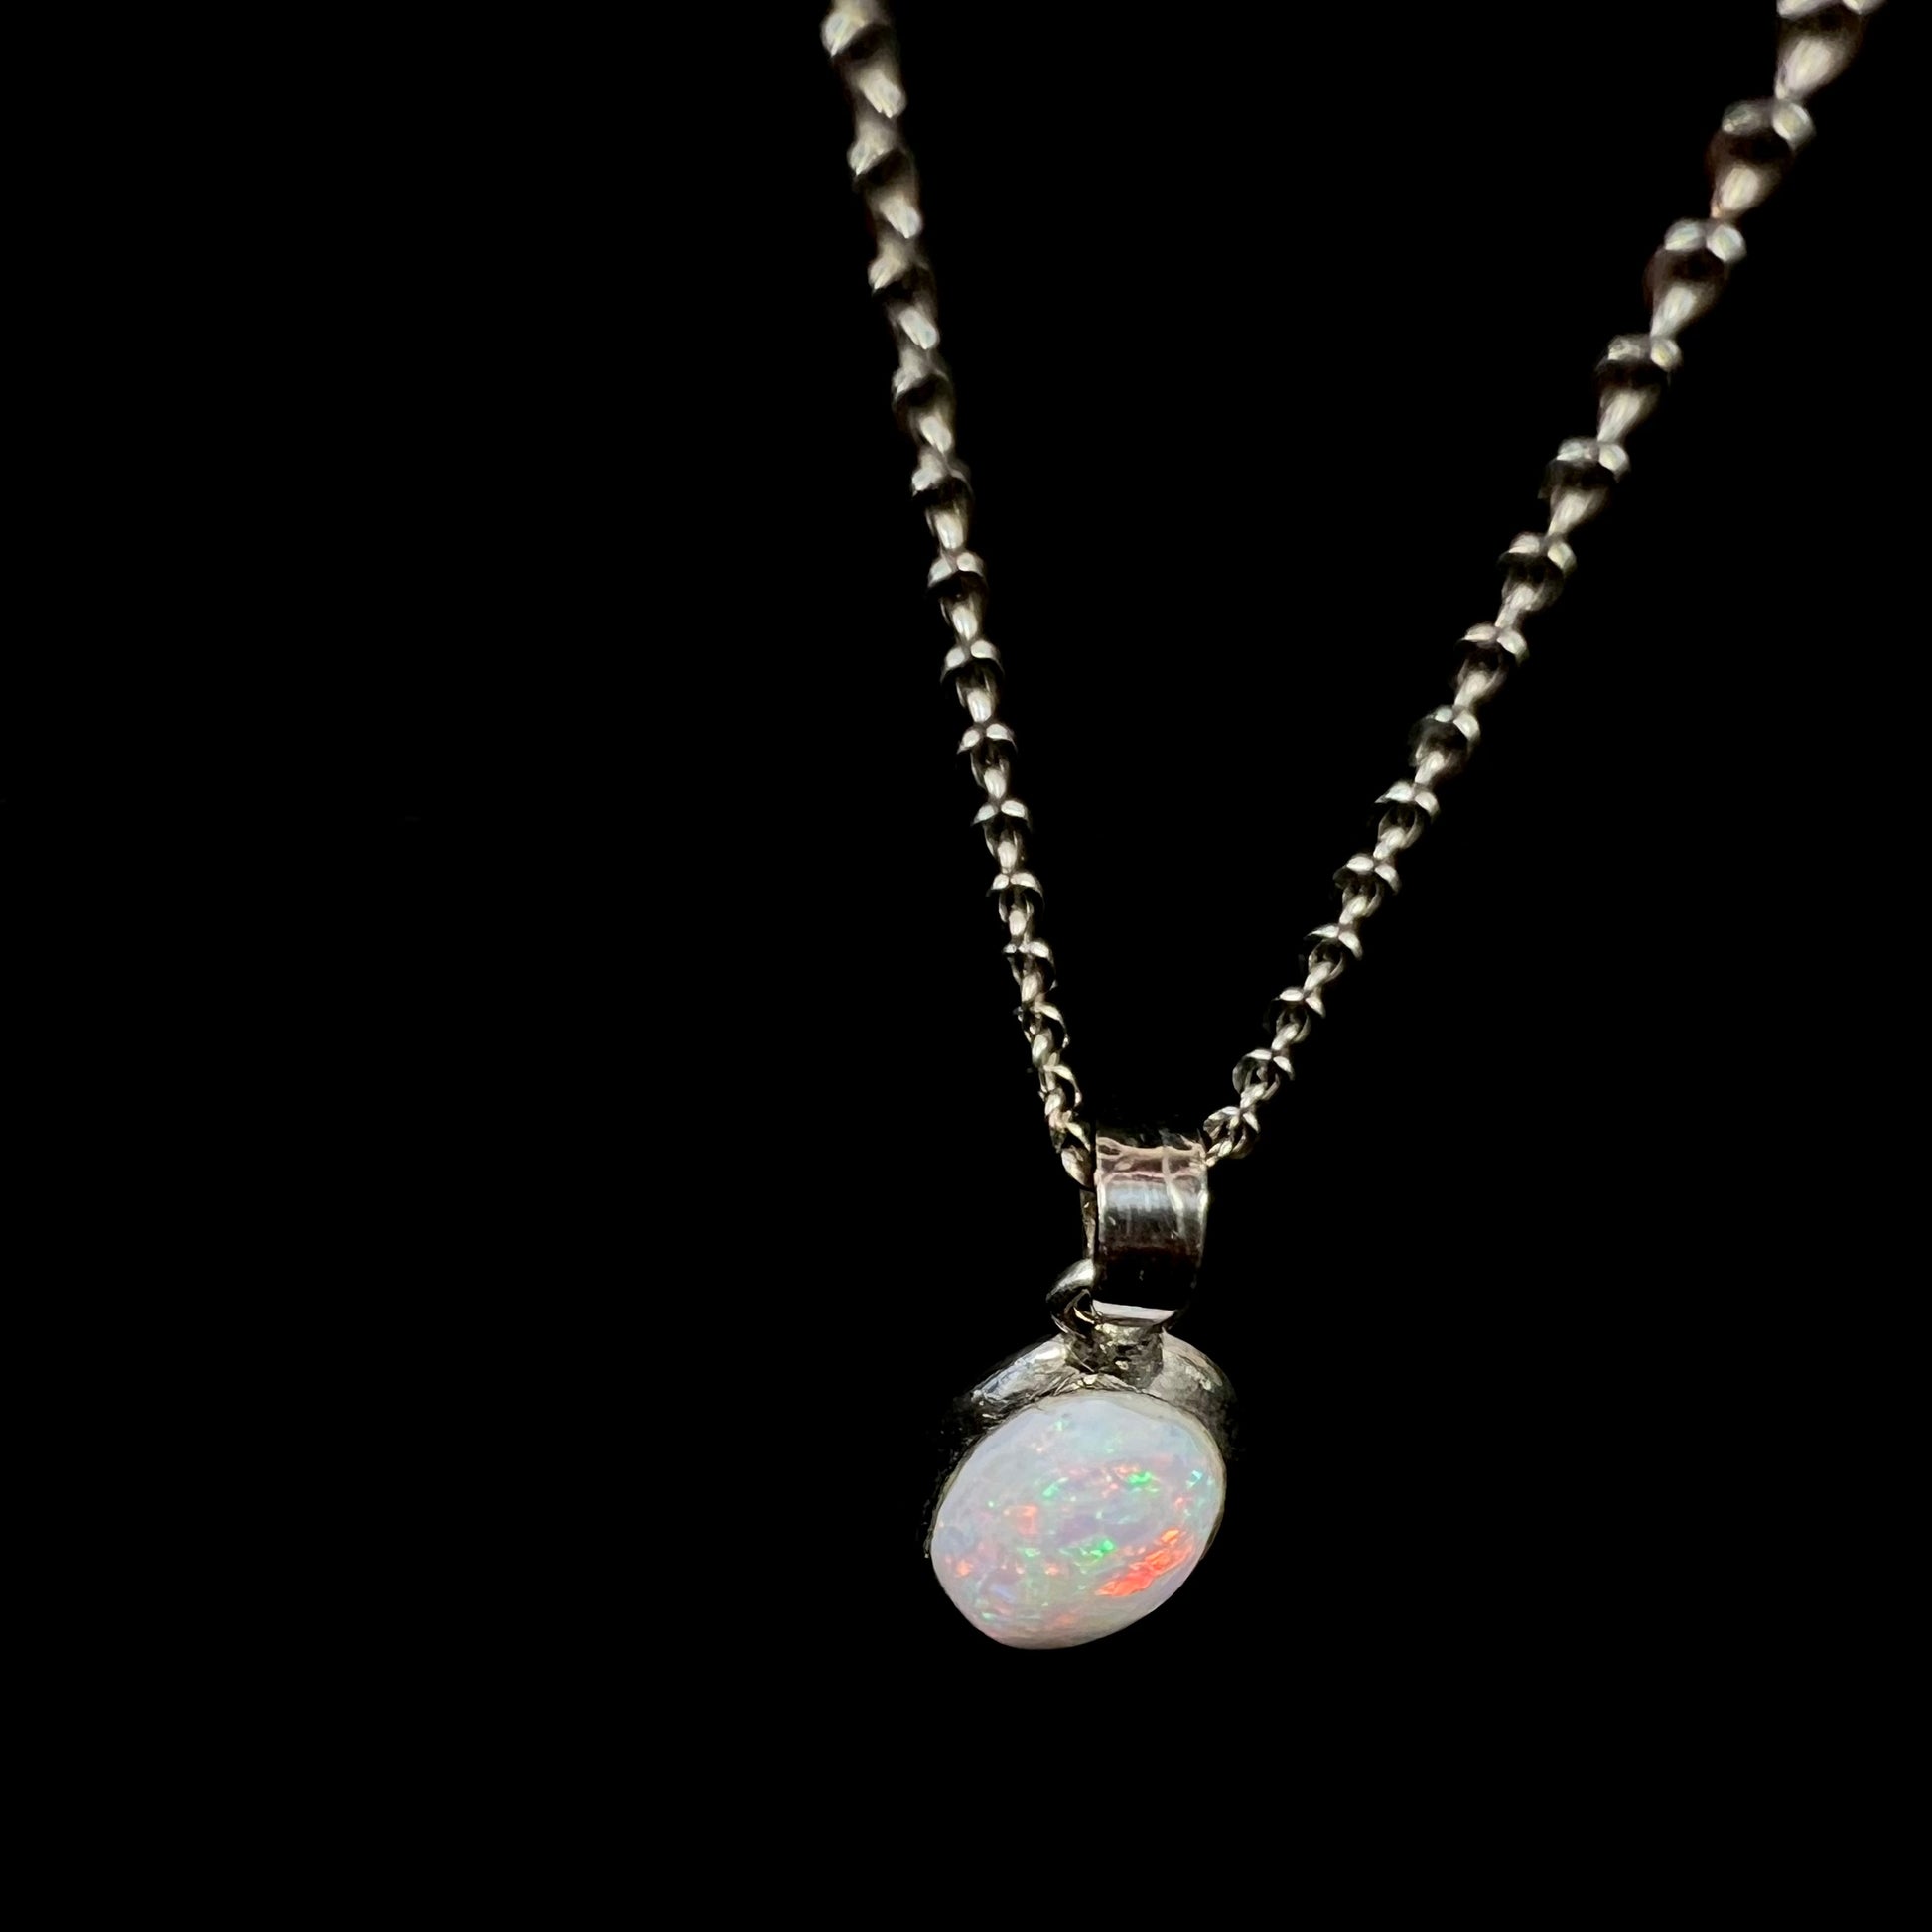 A ladies' adjustable sterling silver necklace bezel set with a natural, oval cabochon cut white crystal opal.